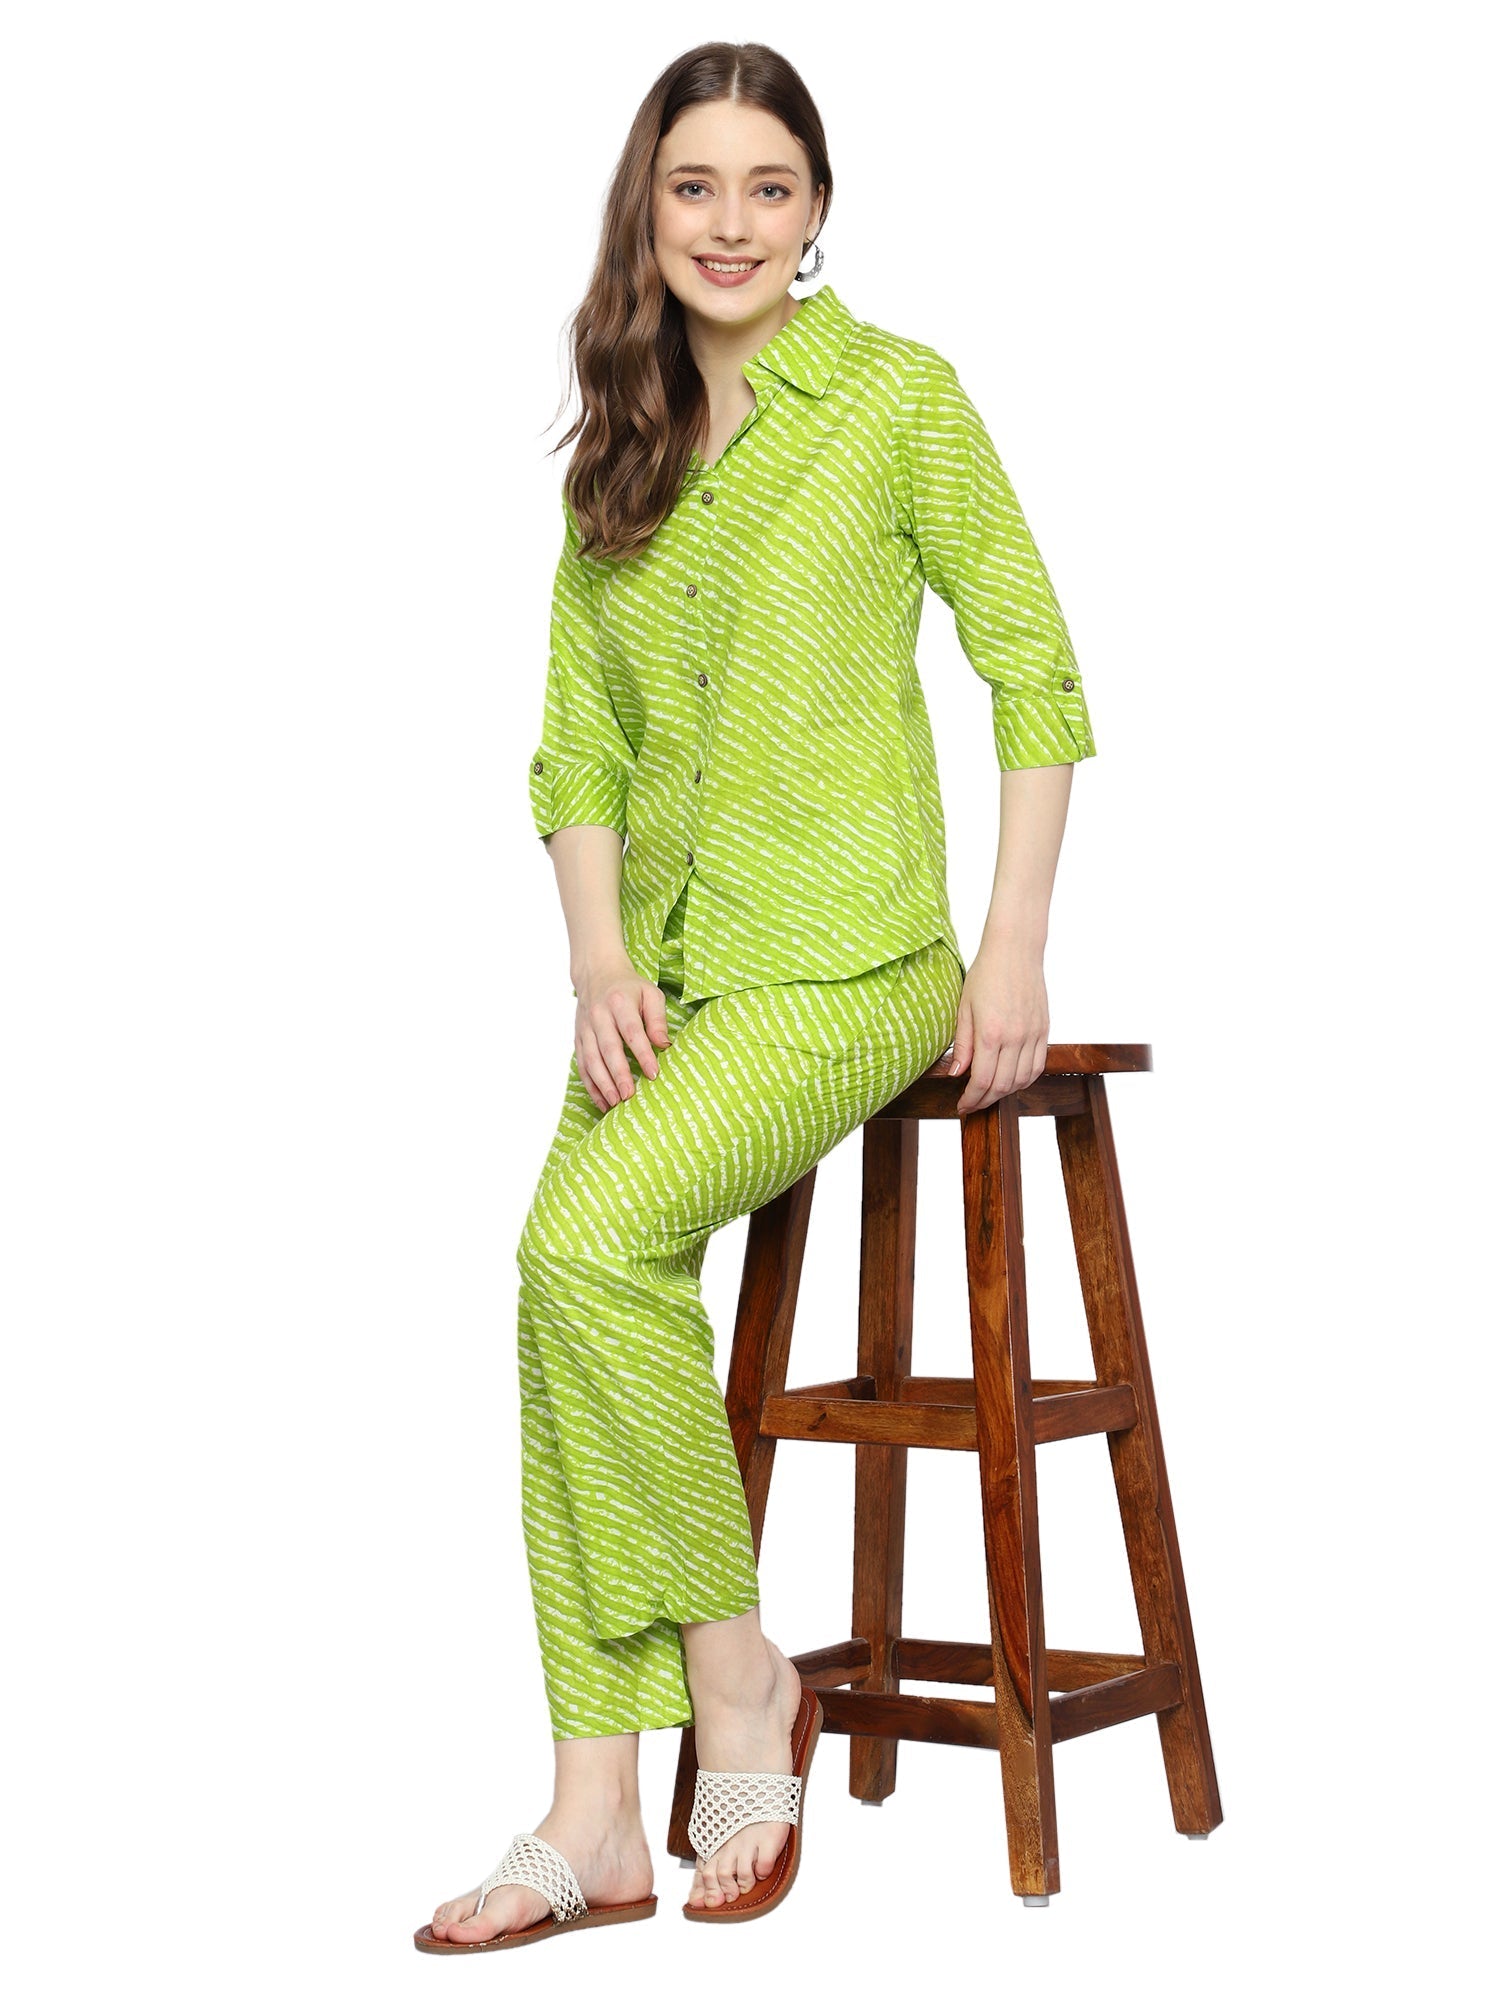 Plus Size Vibrant Rayon Co-ord Set with Green Prints